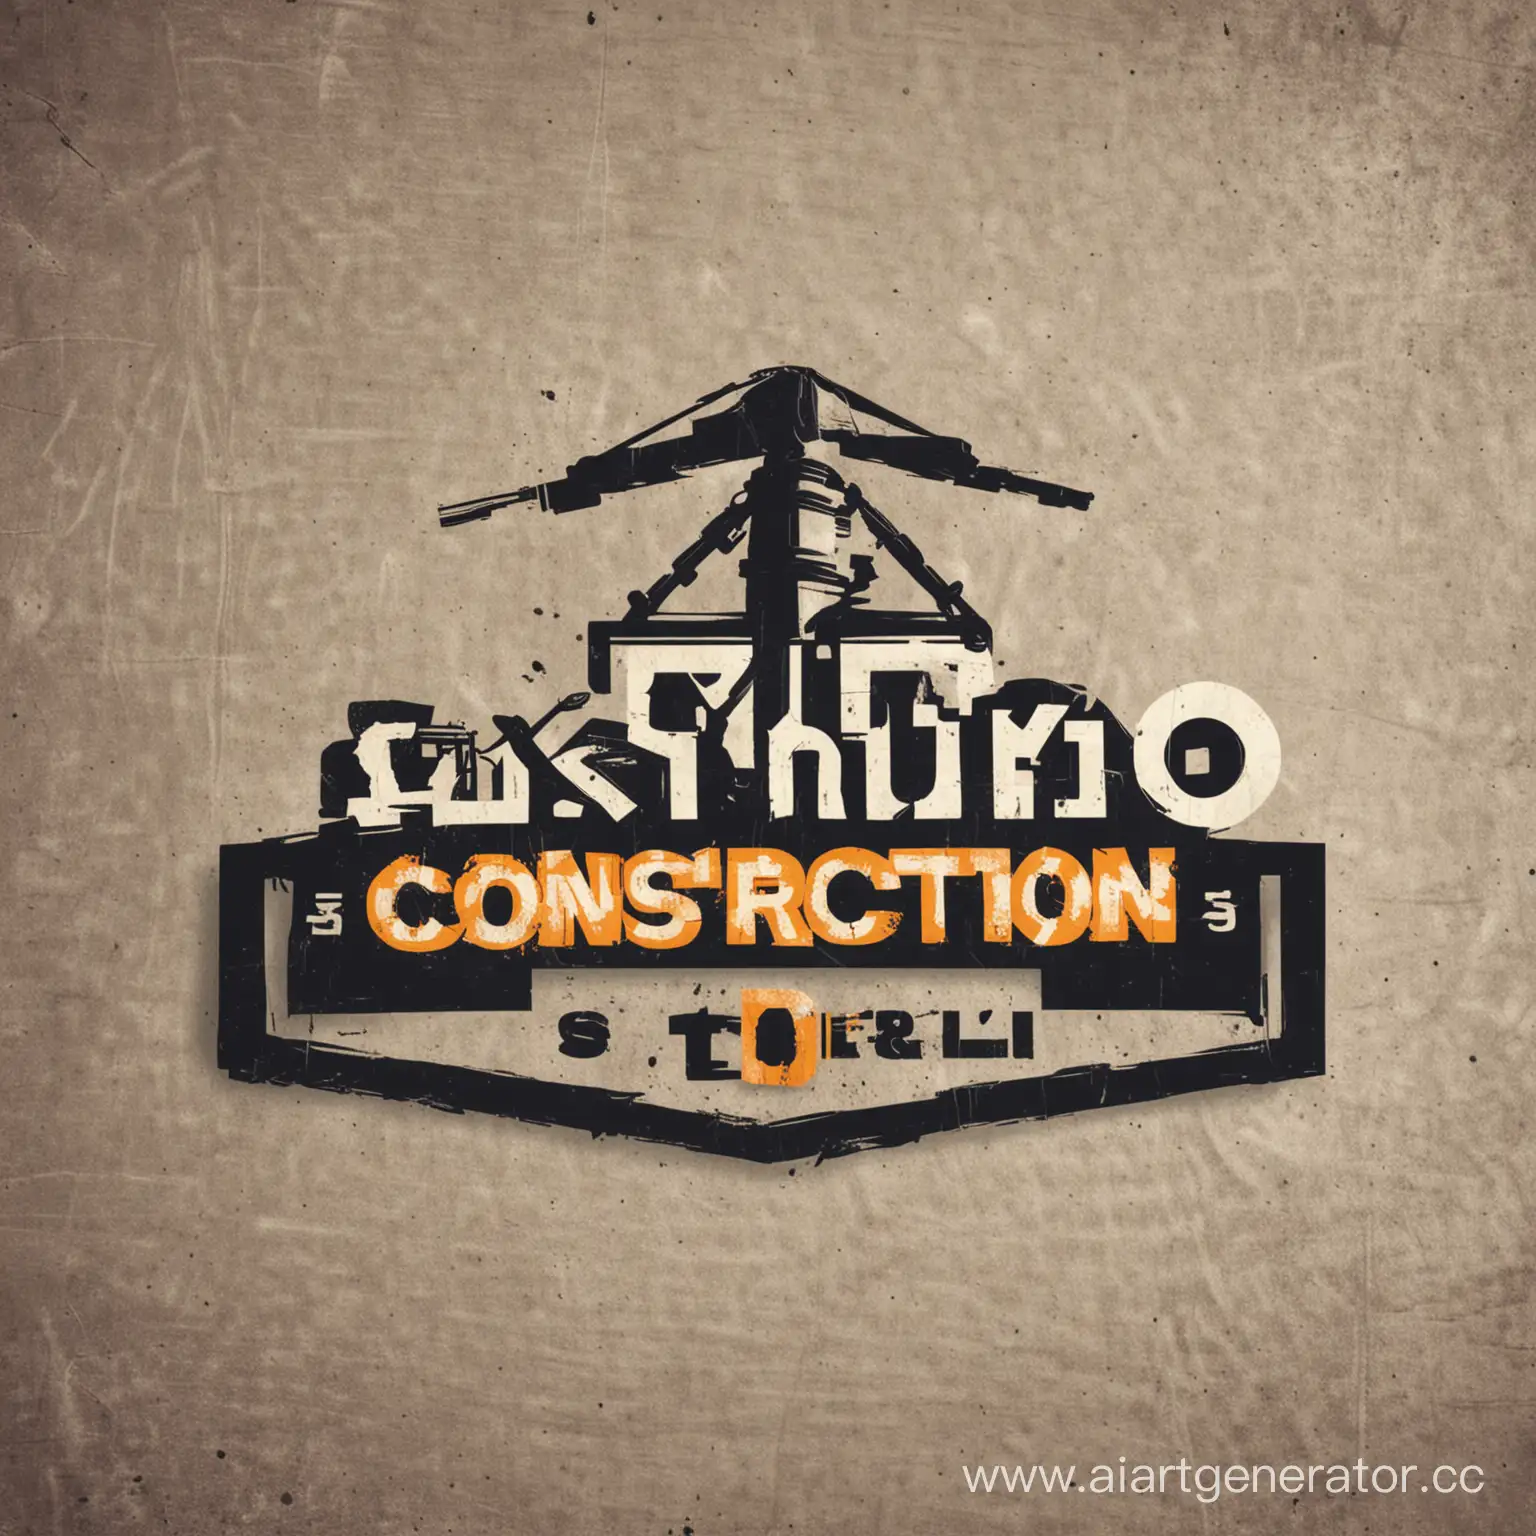 Construction-Store-Family-Fun-Building-Together